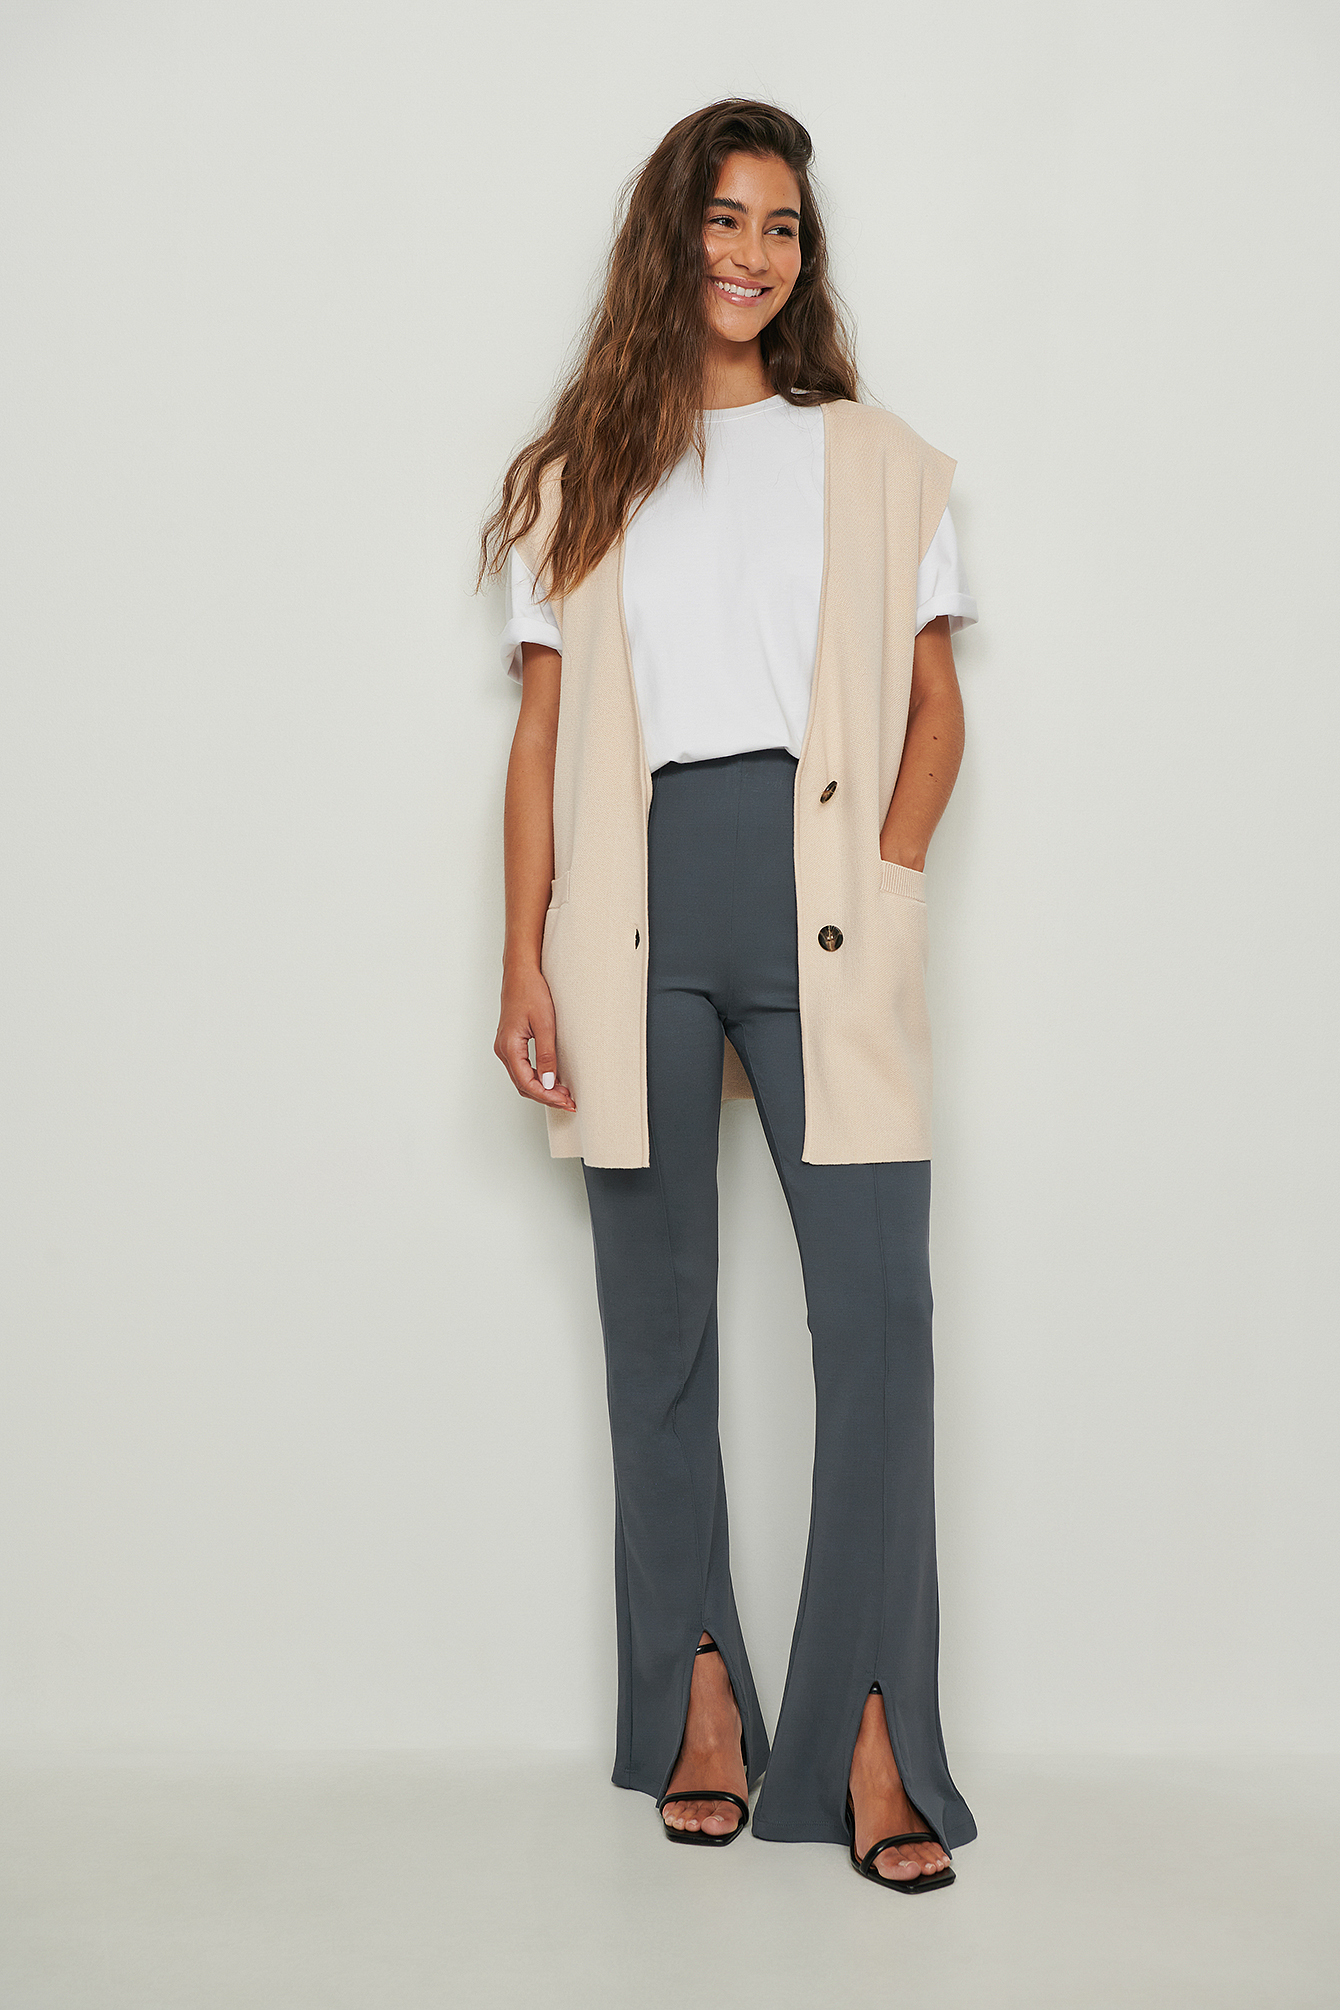 Slit Detail Jersey Pants Outfit